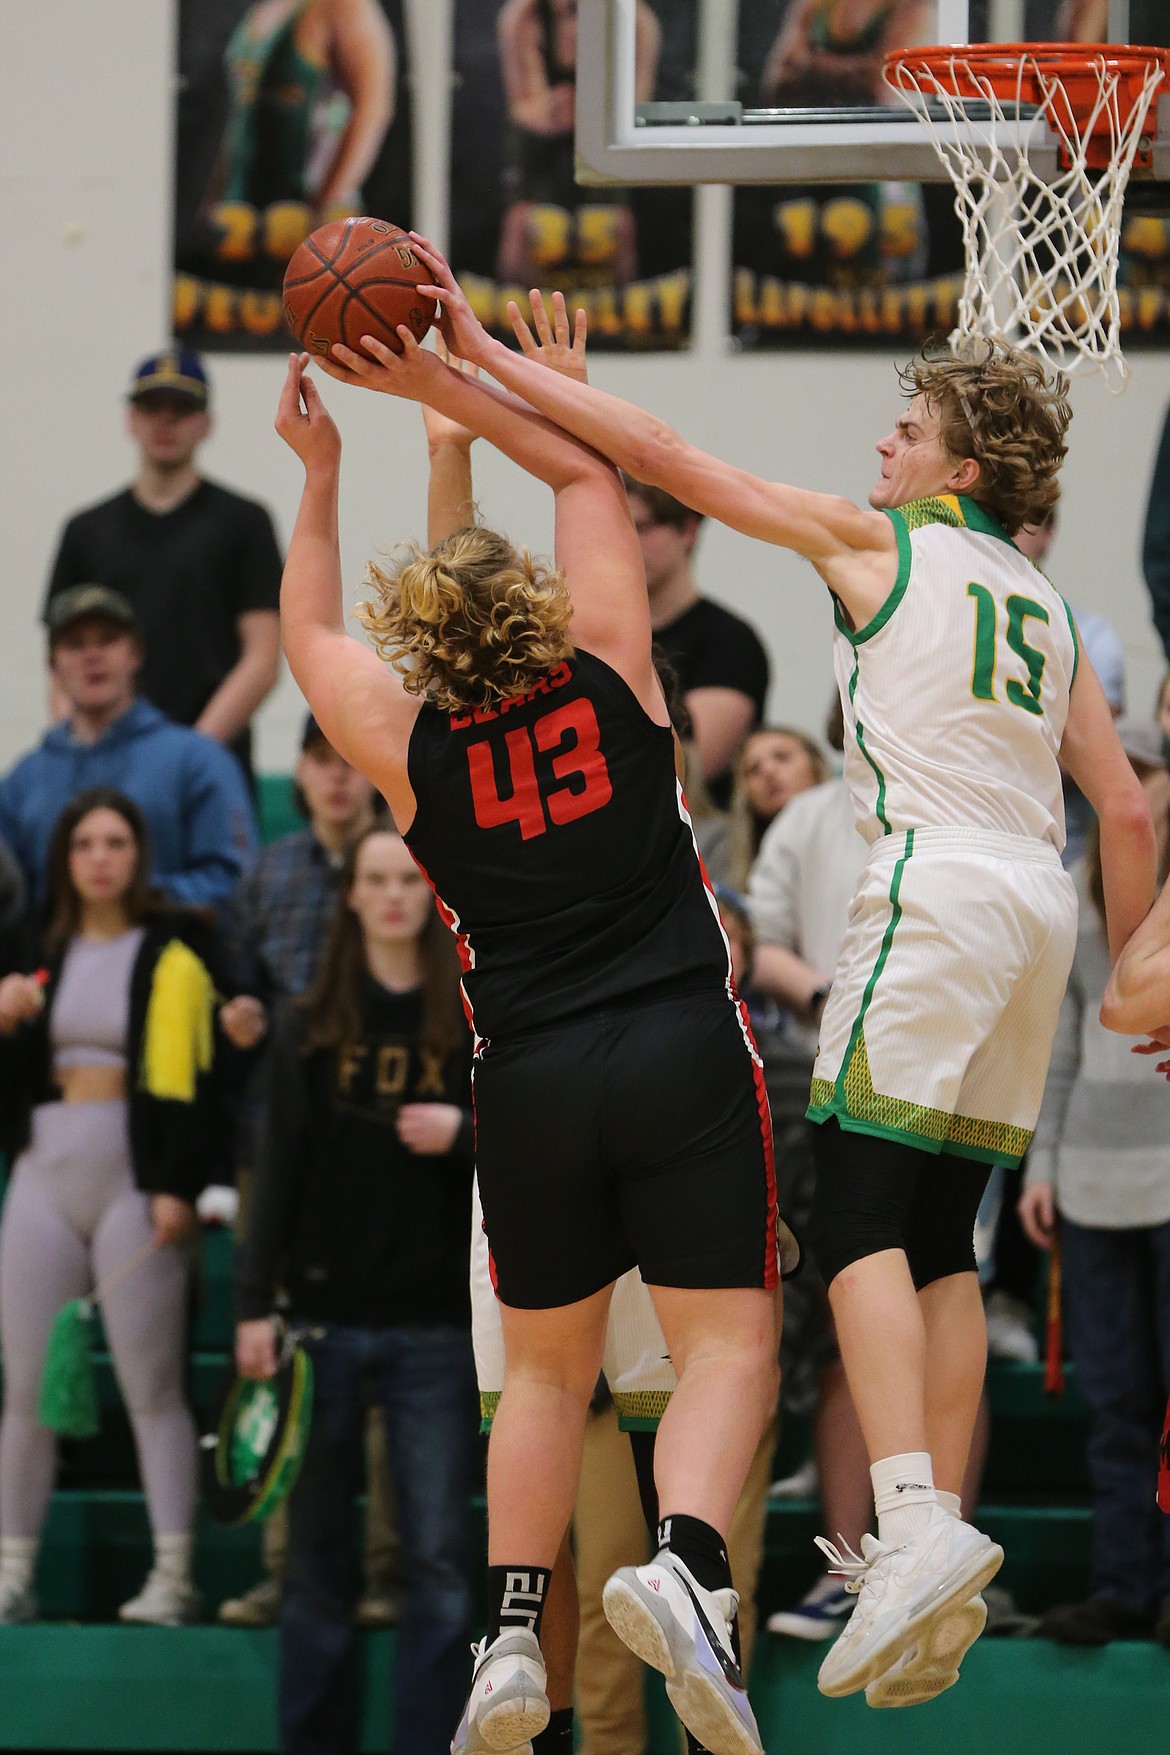 JASON DUCHOW PHOTOGRAPHY
Noah Haaland (15) of Lakeland blocks a shot by Tyler Skinner of Moscow on Friday in Game 2 of a best-of-3 series for the 4A Region 1 basketball championship at Hawk Court.